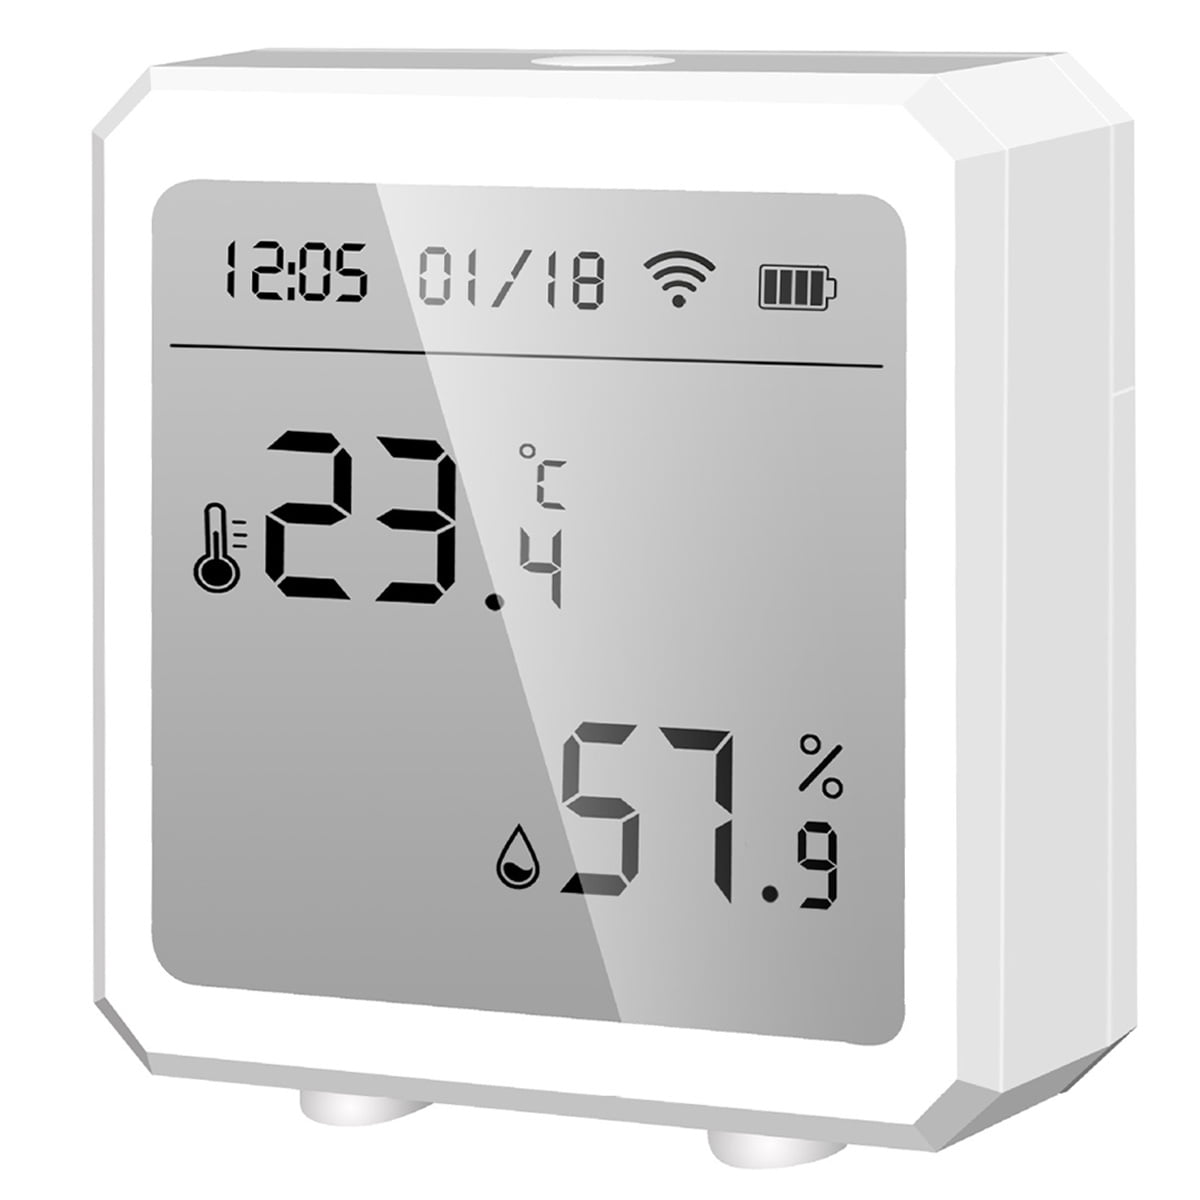 Wireless Weather Station Temperature Humidity Sensor Meter Smart Home Device 